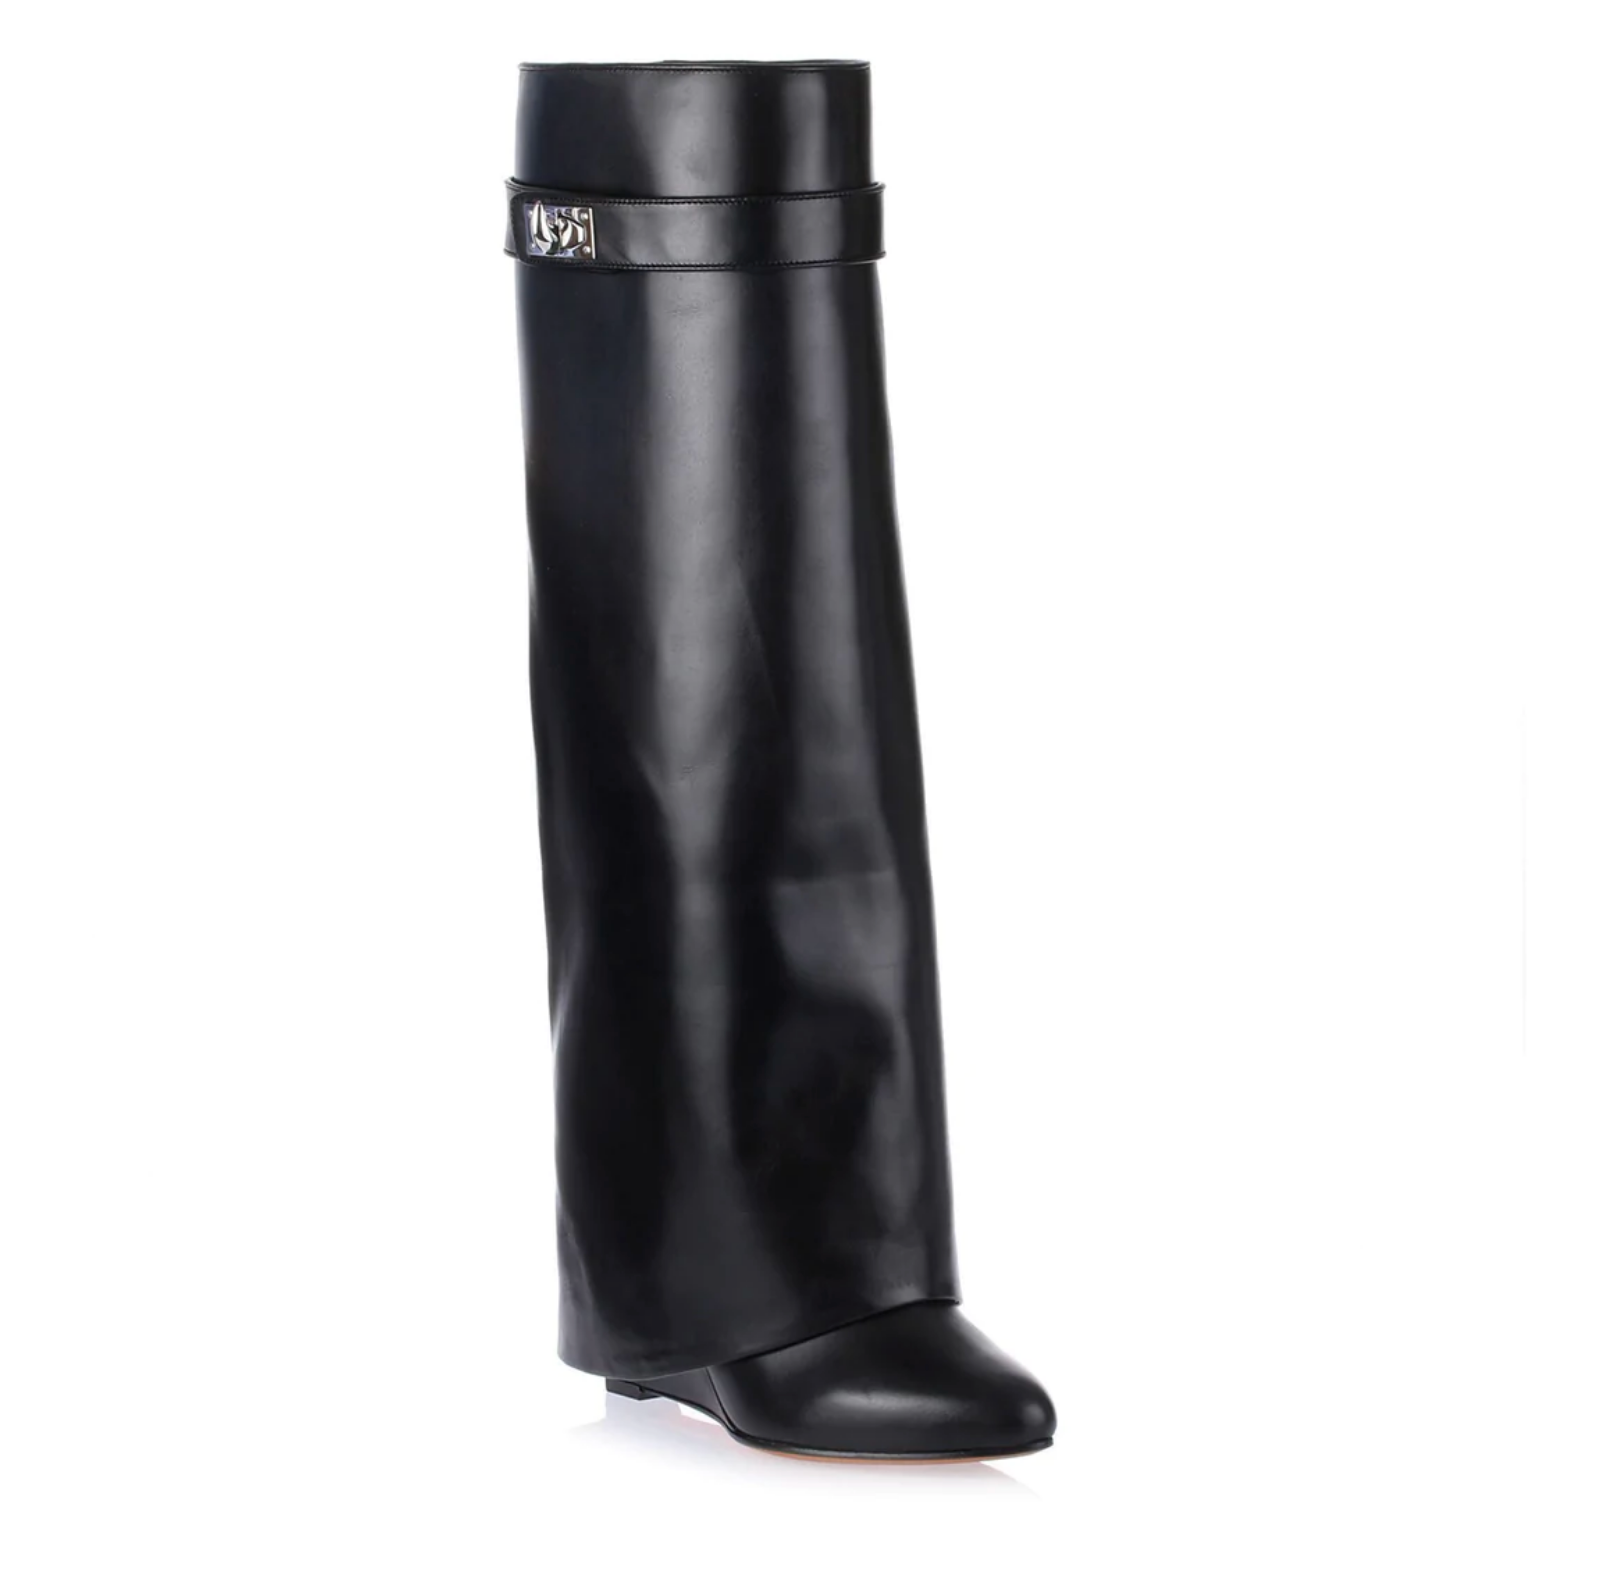 Shark Lock Embellished Knee High Boots in Gold - Givenchy